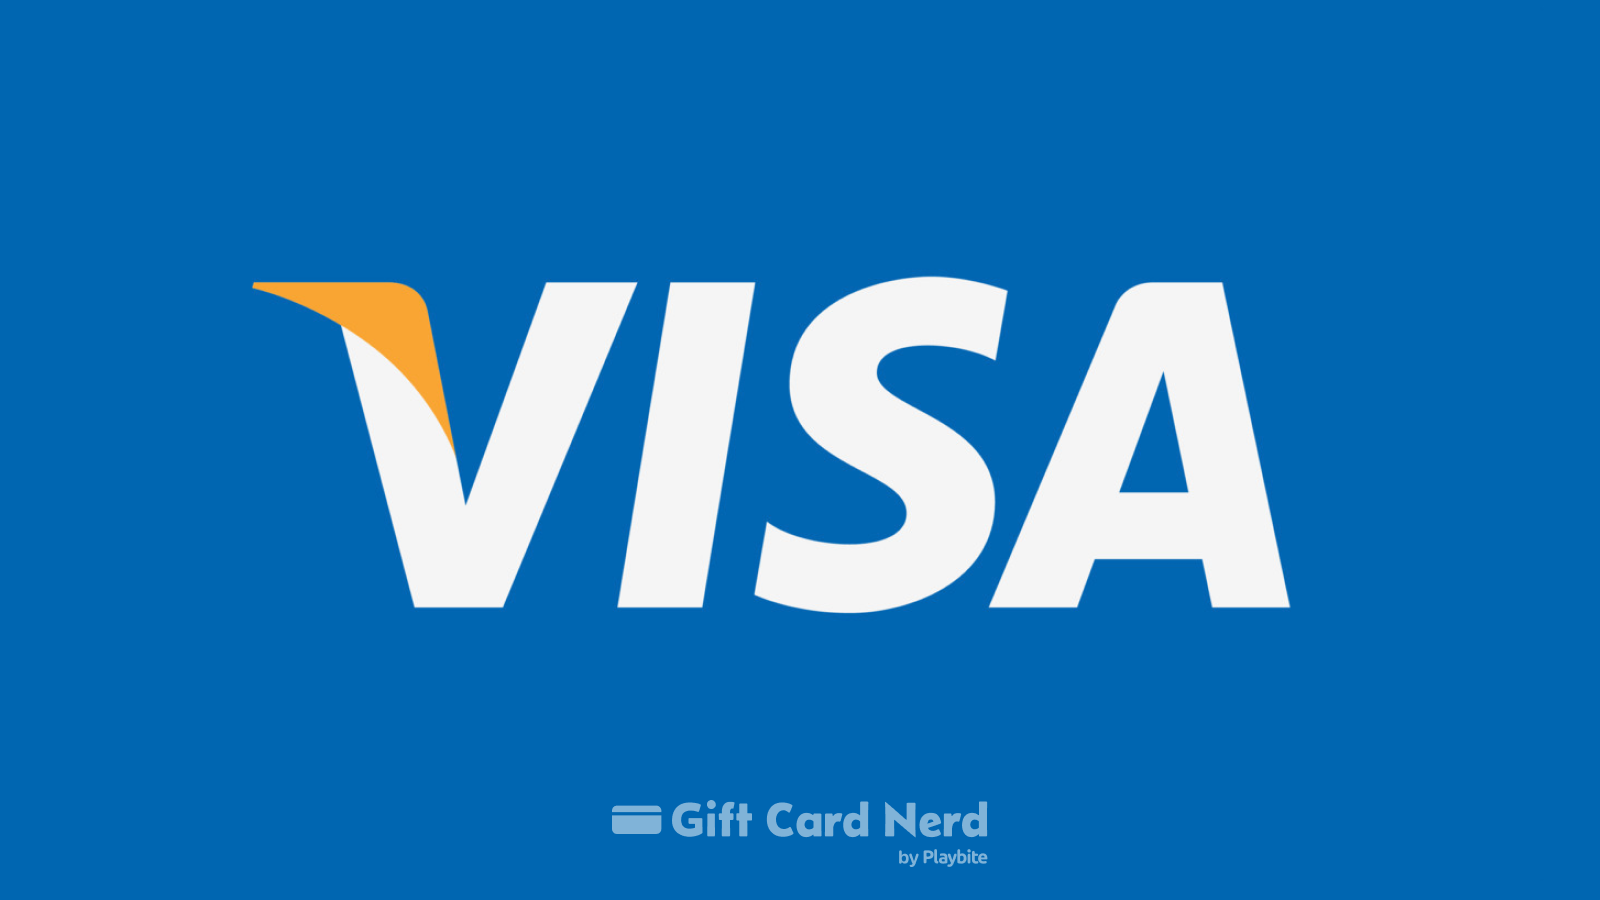 Can You Use a Visa Gift Card on Apple Wallet?